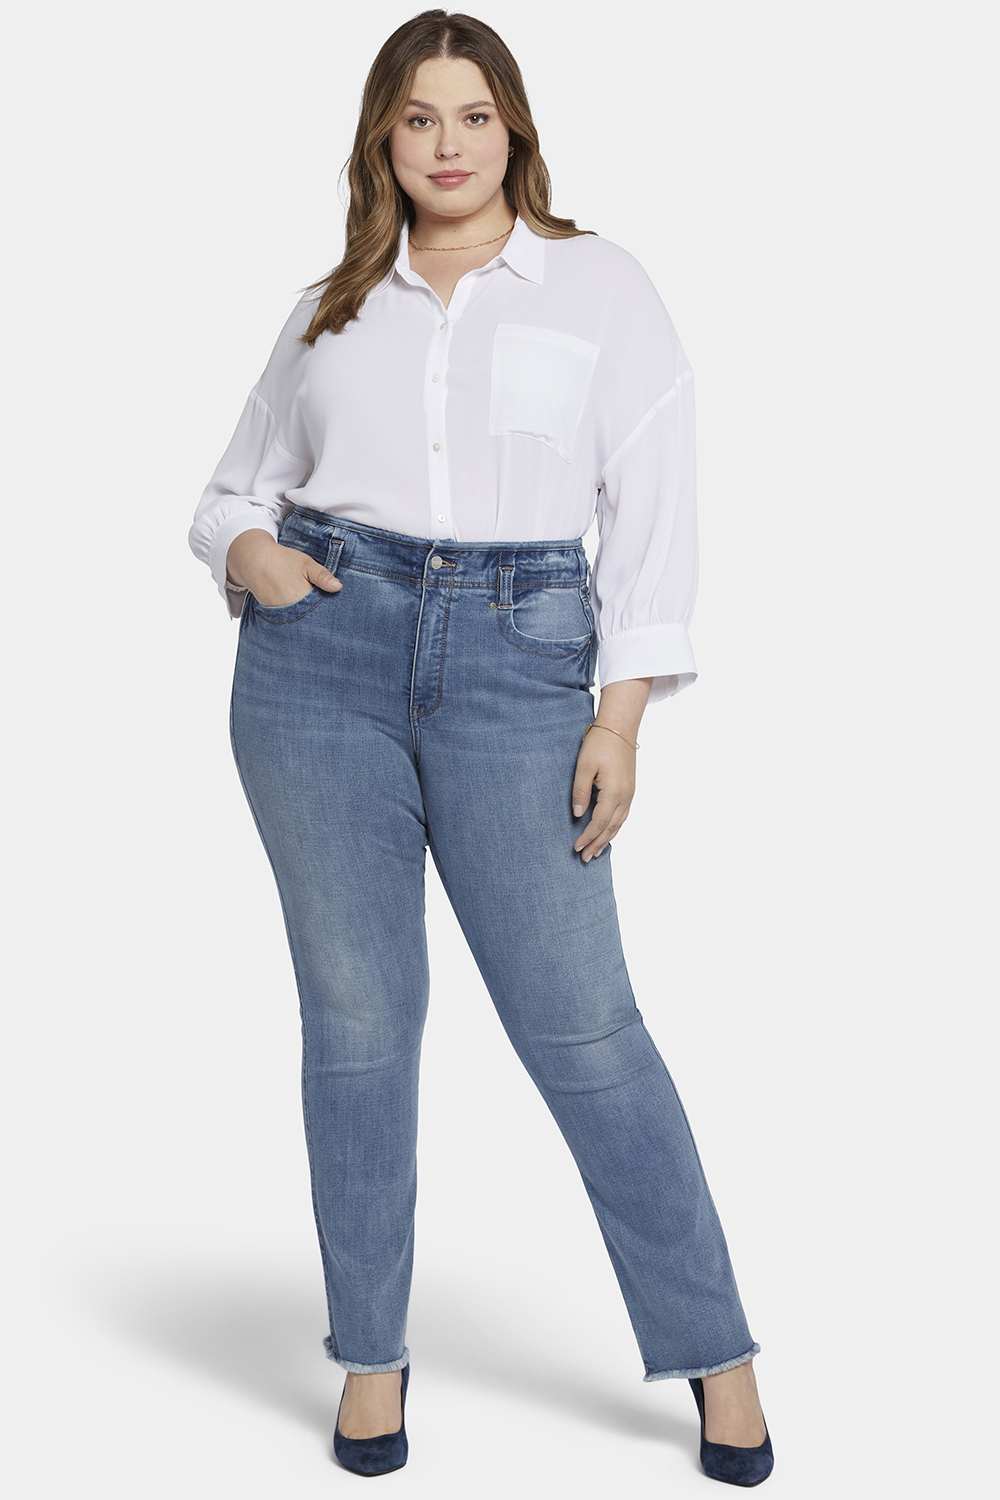 Turning Blue Women Plus Size Wide Leg High-Rise Stretchable Jeans